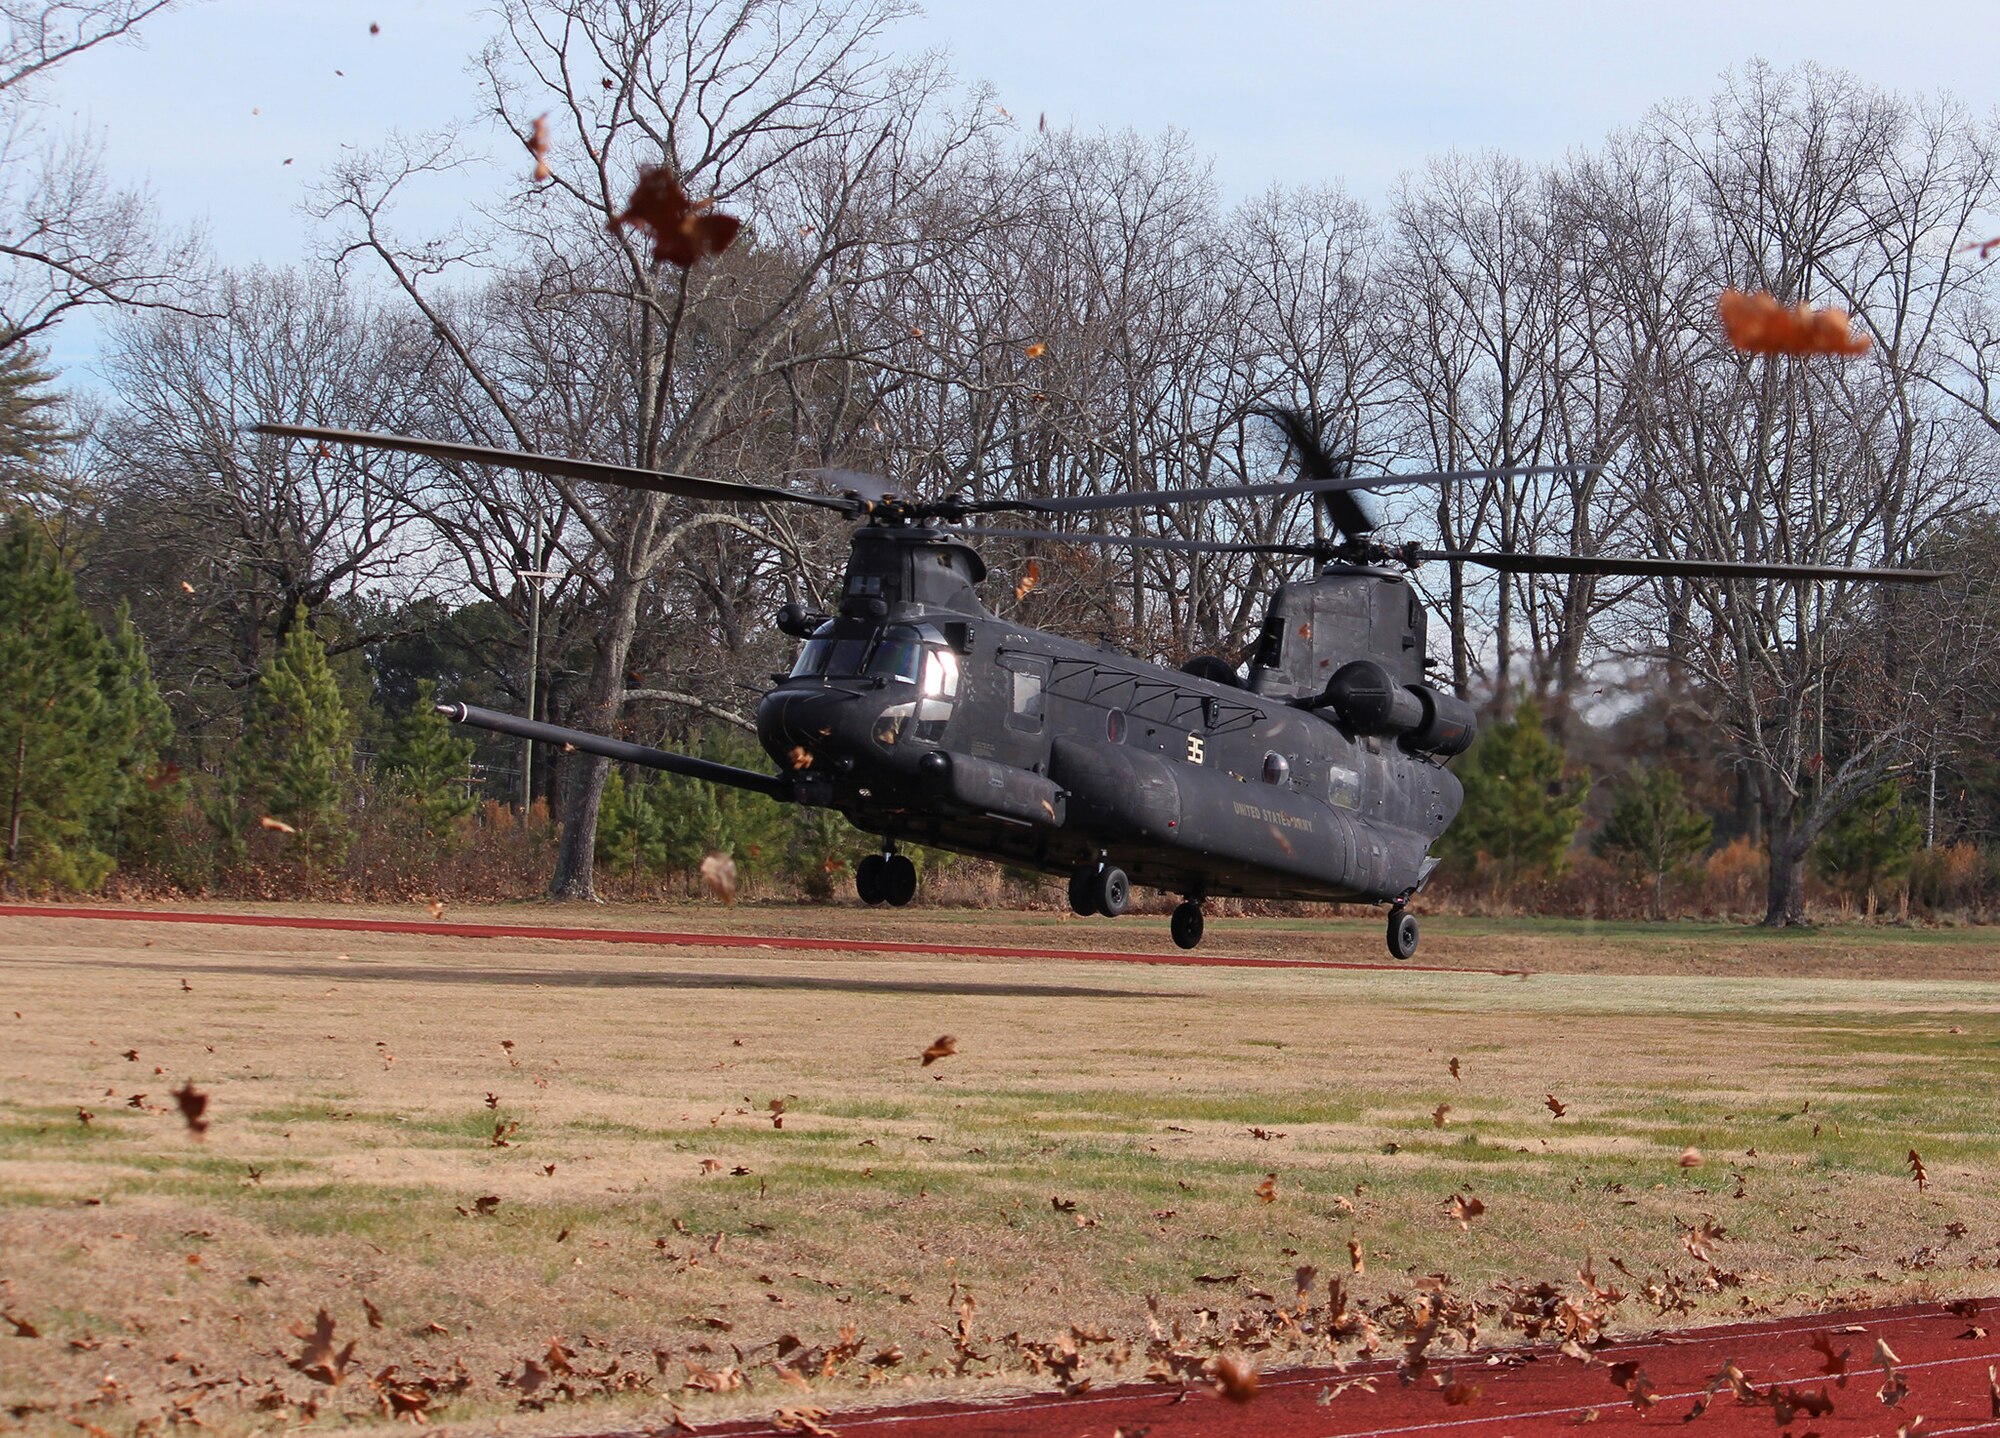 A Boeing CH-47 Chinook lands at Arnold Air Force Base, Tenn., as part of a training exercise Dec. 20, 2019, for members of Arnold Fire and Emergency Services. During the training, the FES personnel learned about the equipment and various working parts of three different U.S. Army helicopters in the event the team is called to an emergency situation involving such aircraft. (U.S. Air Force photo by Deidre Moon)